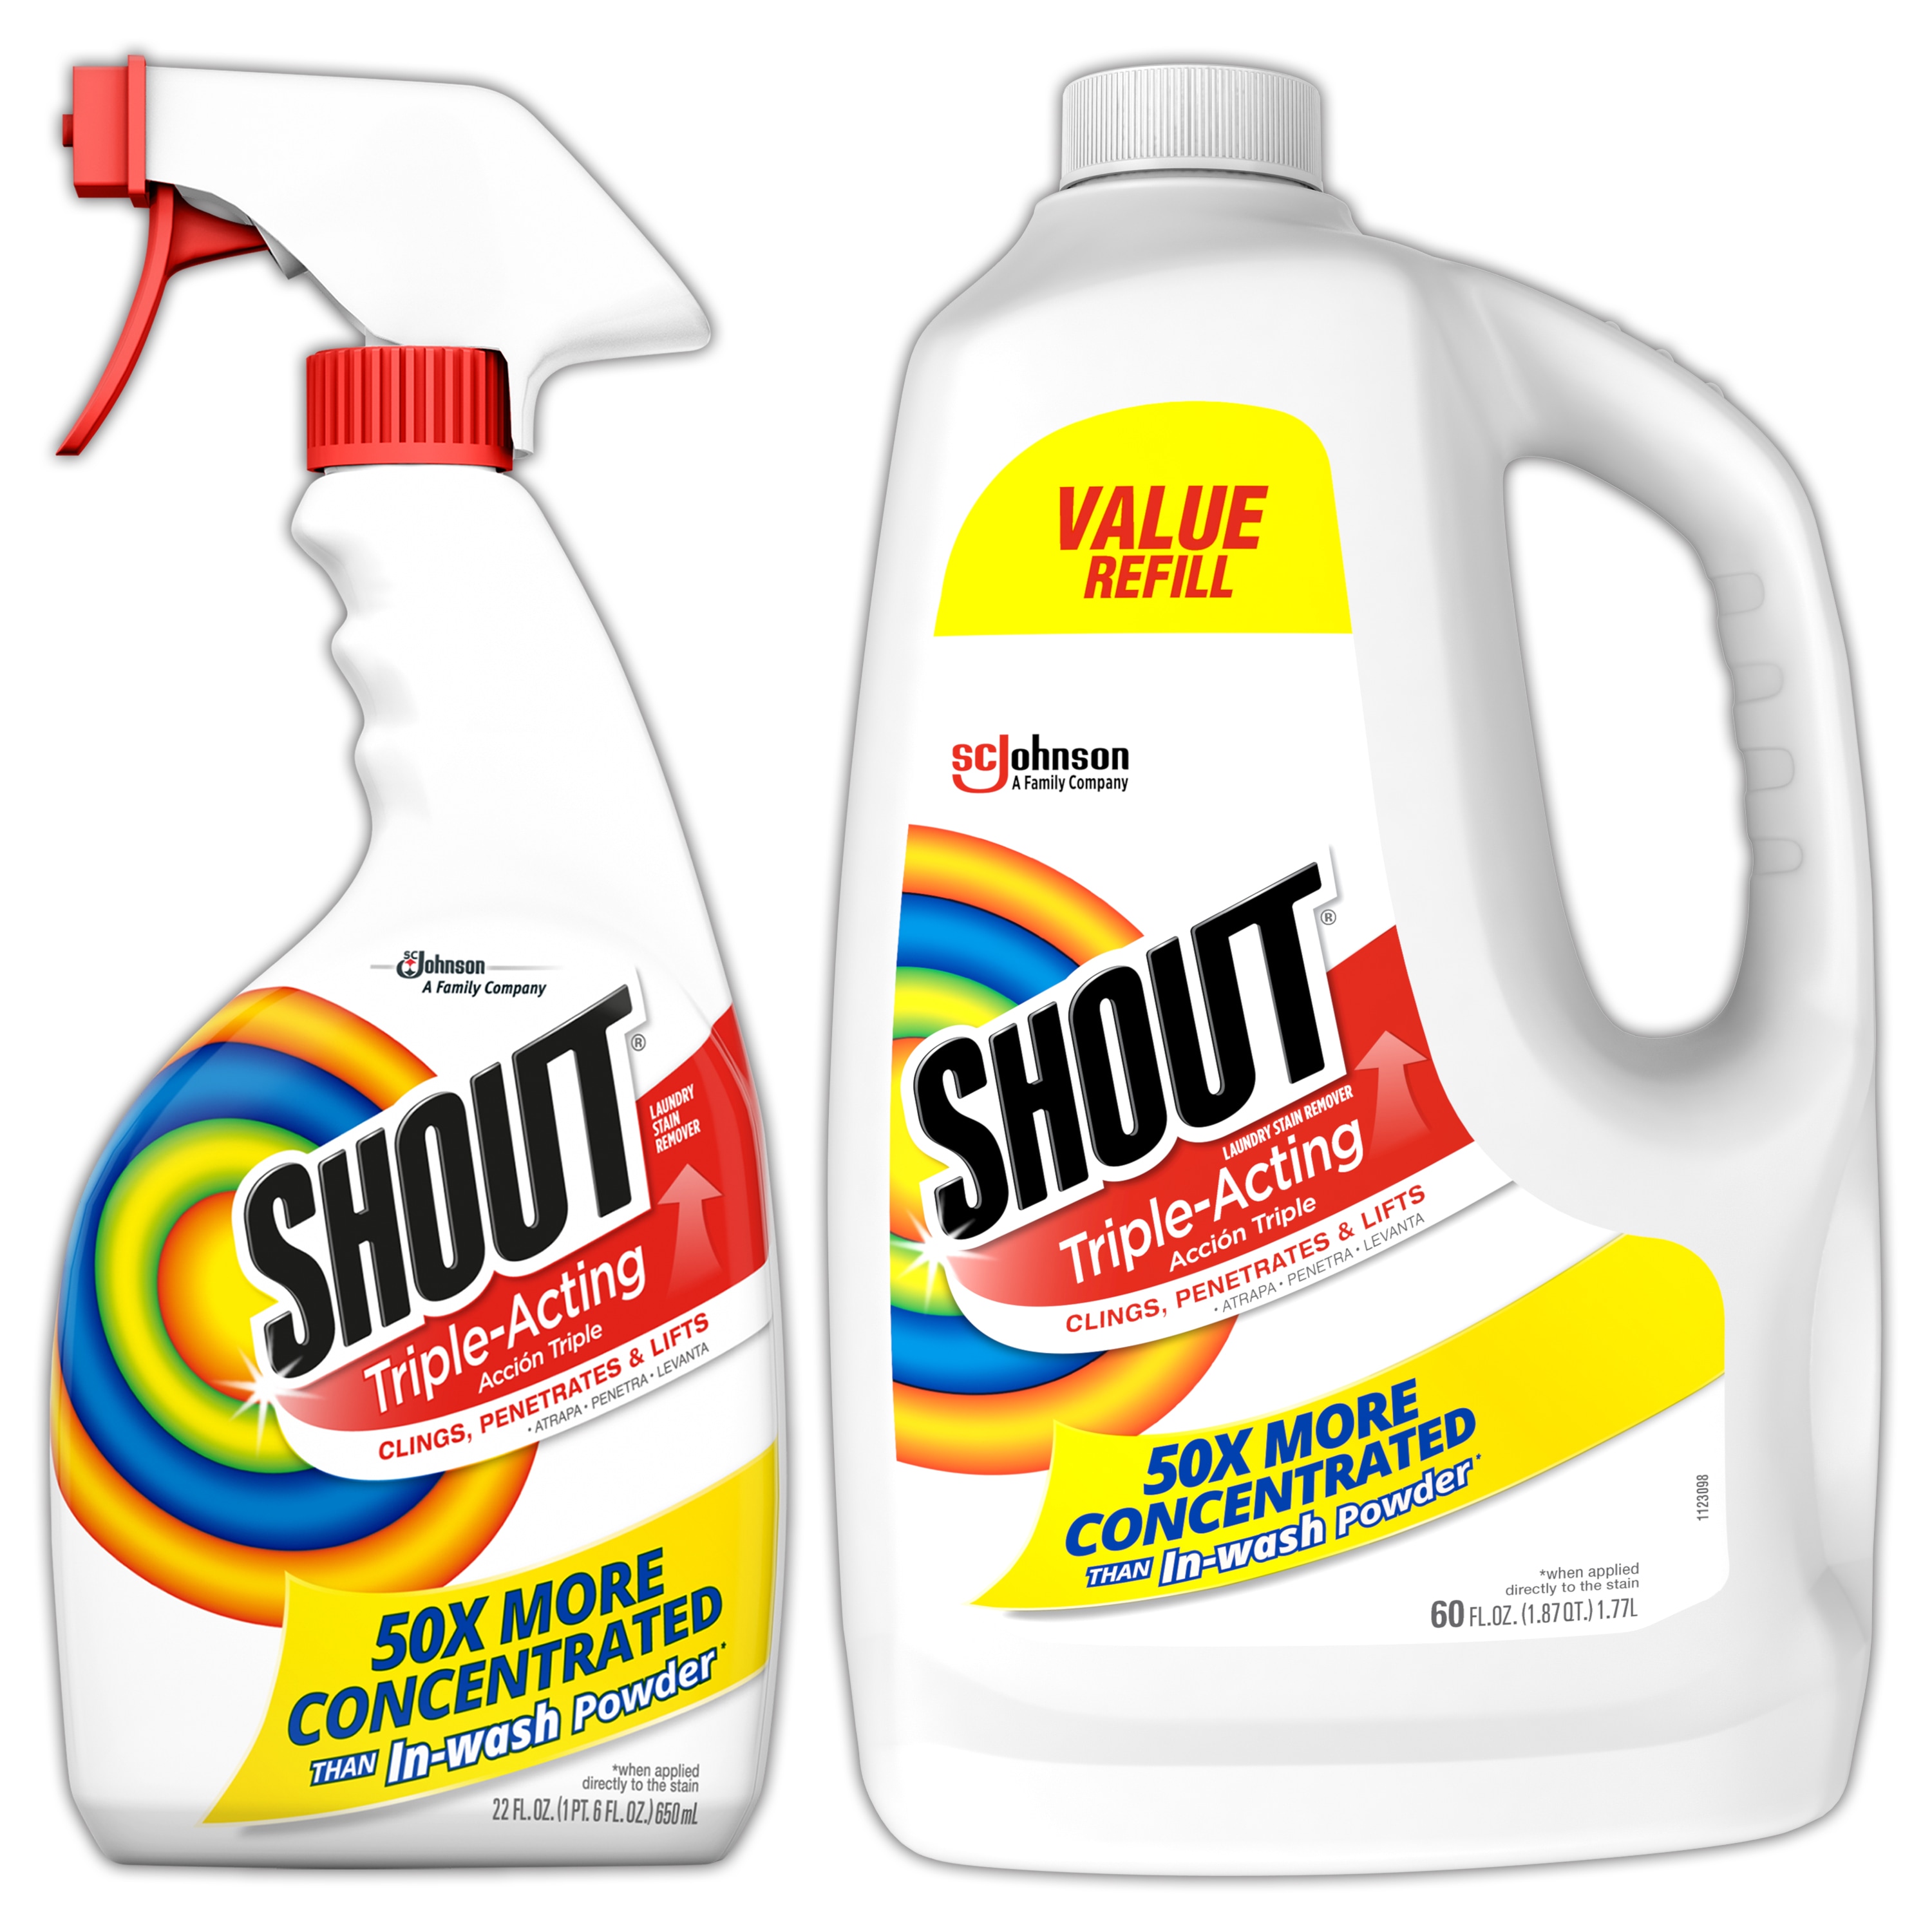 Shout Free Laundry Stain Remover - 22 fl oz